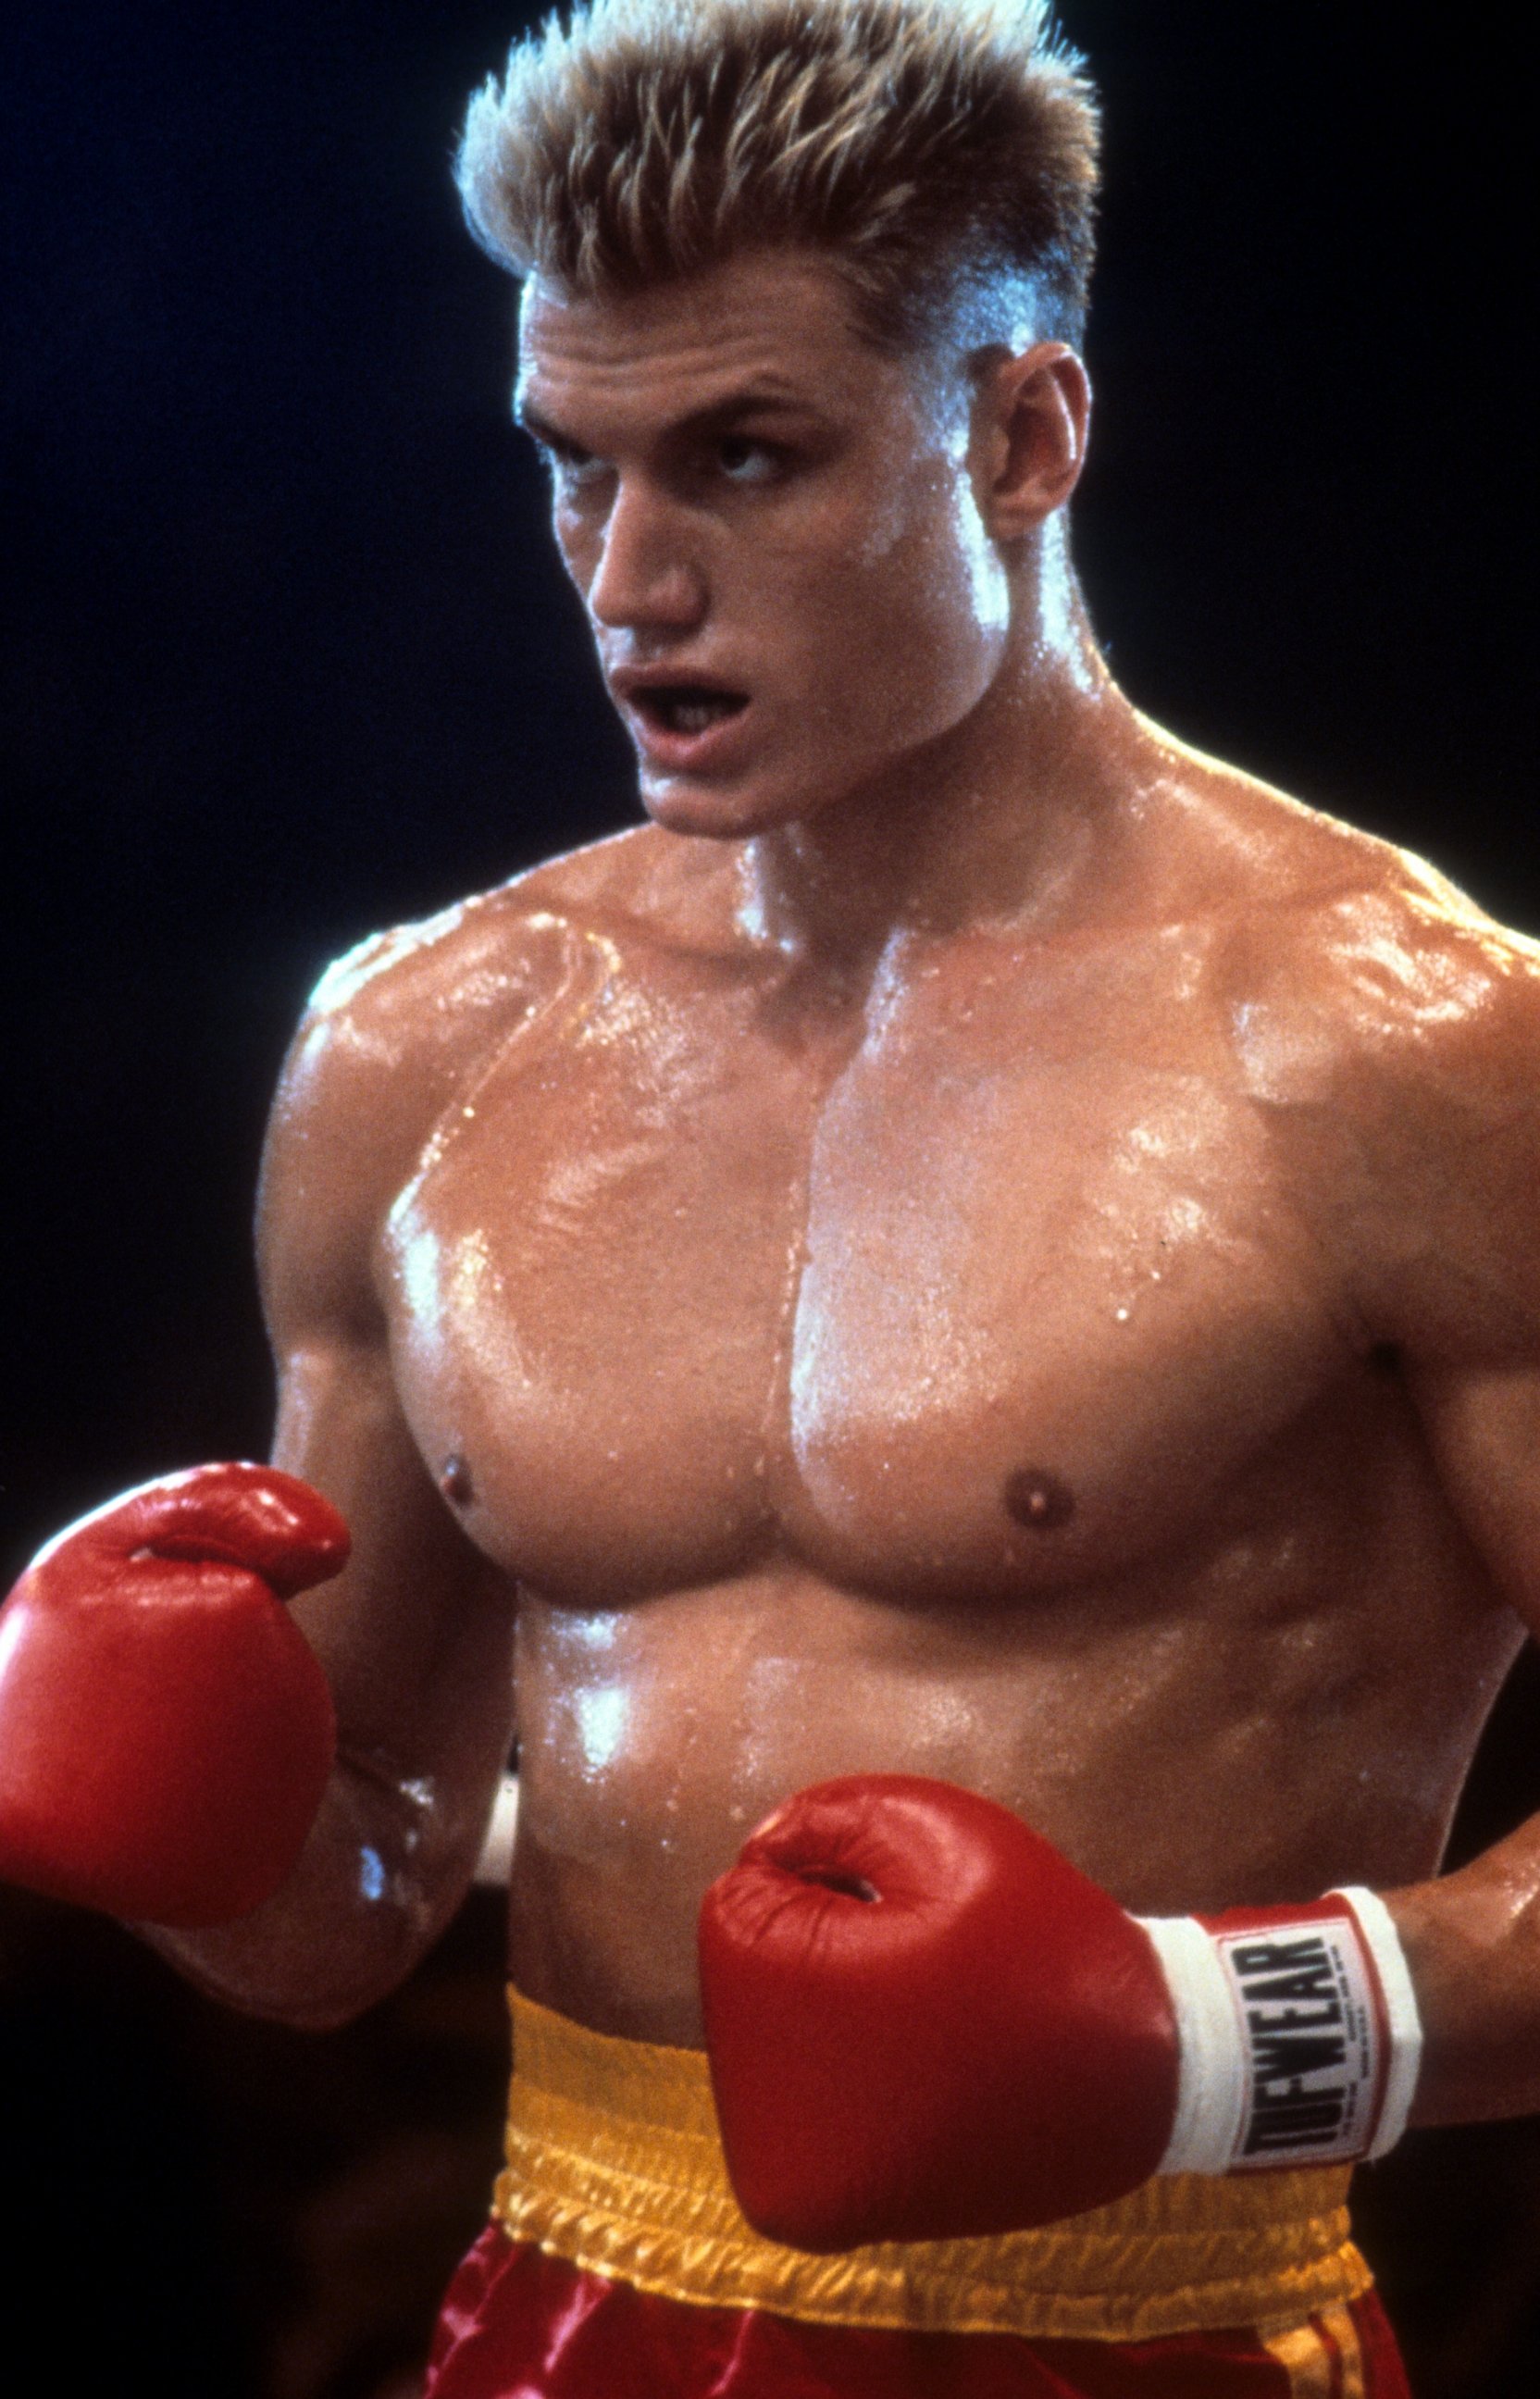 PHOTO: Dolph Lundgren in a scene from the film "Rocky IV" in 1985.  